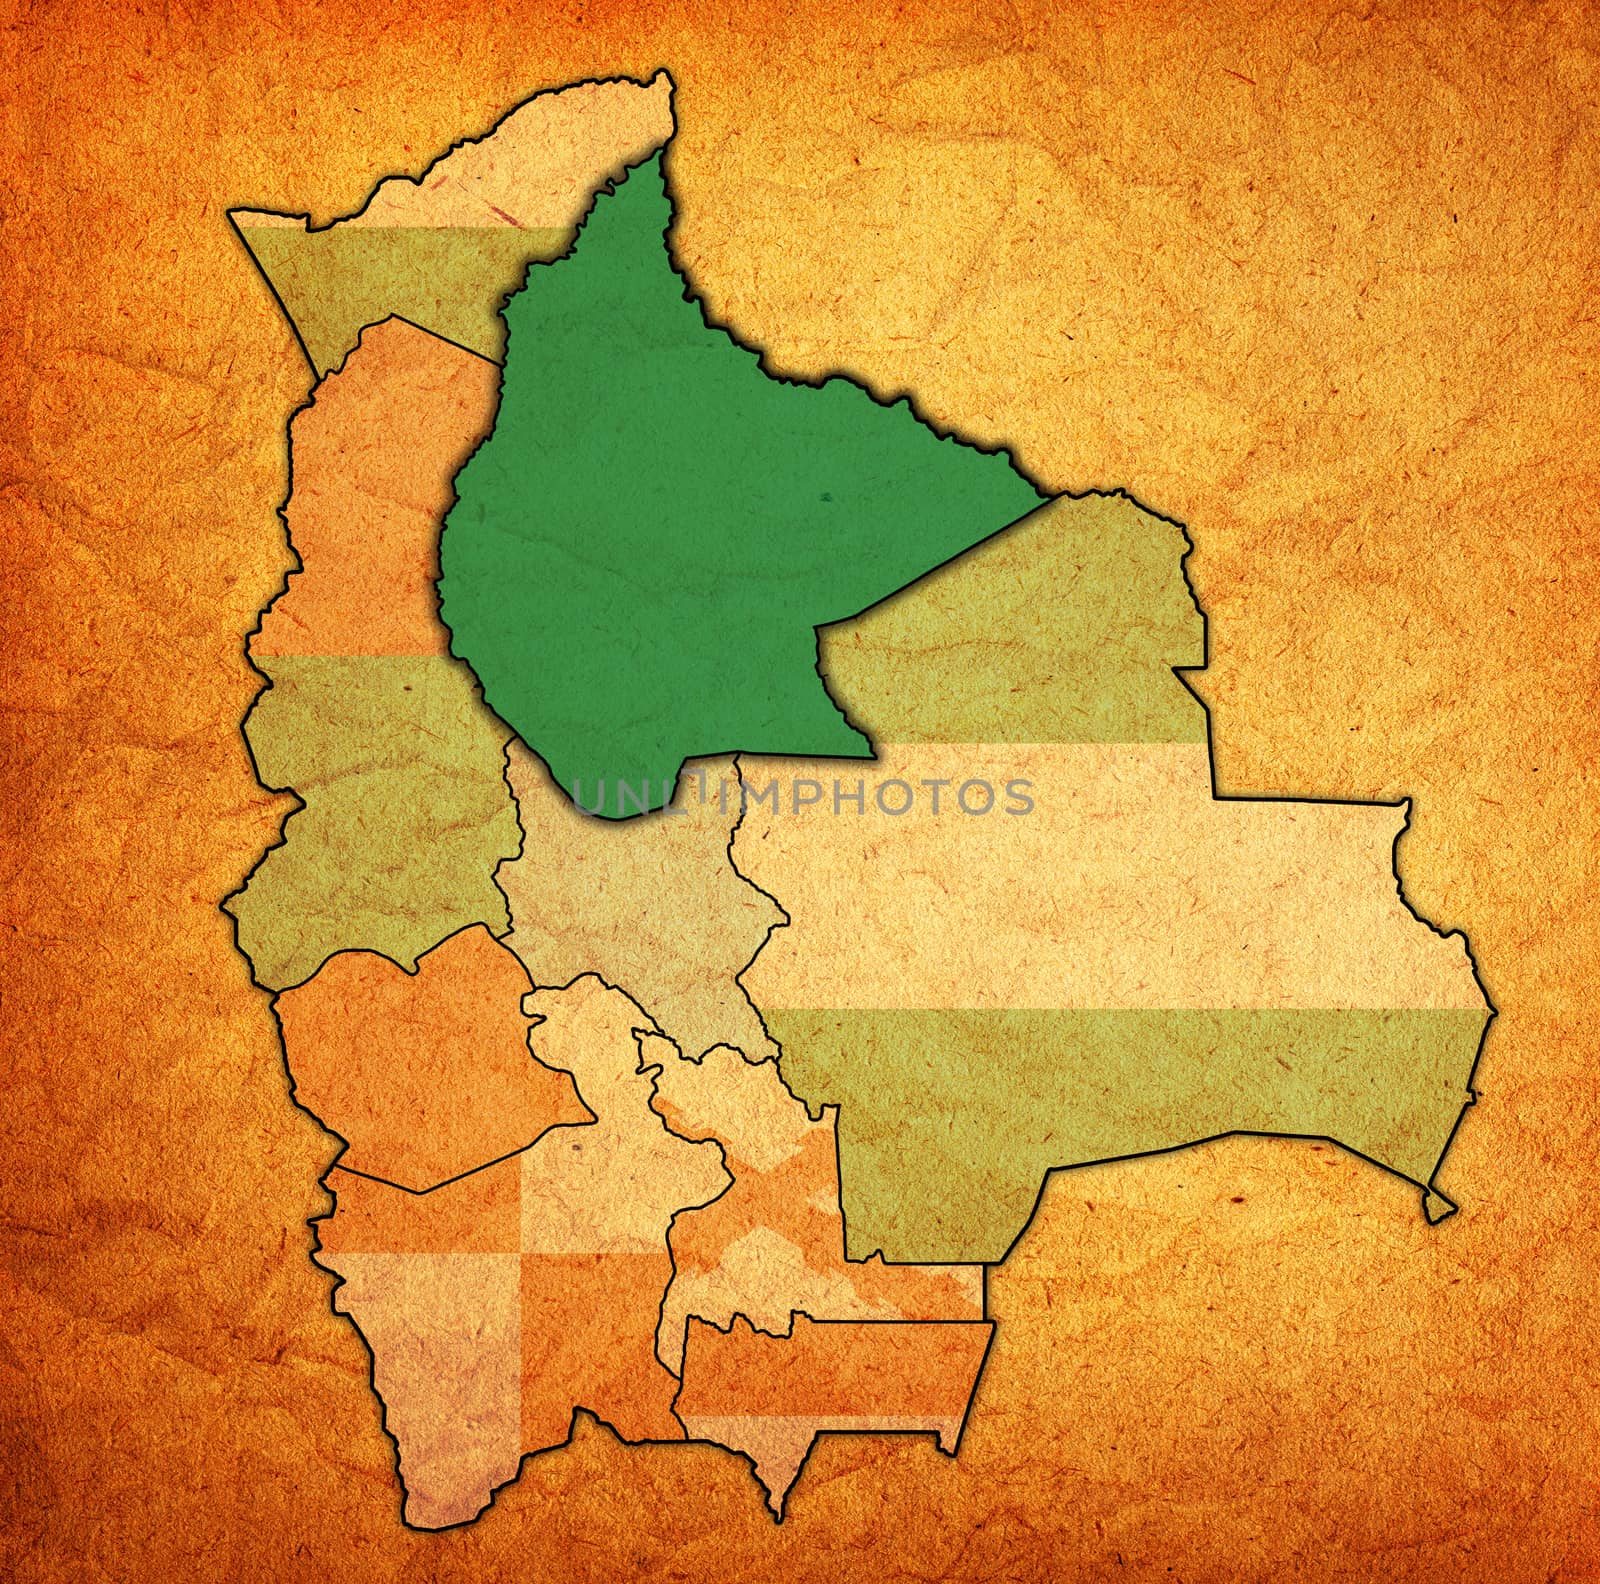 territory of Beni region on administration map of Bolivia by michal812